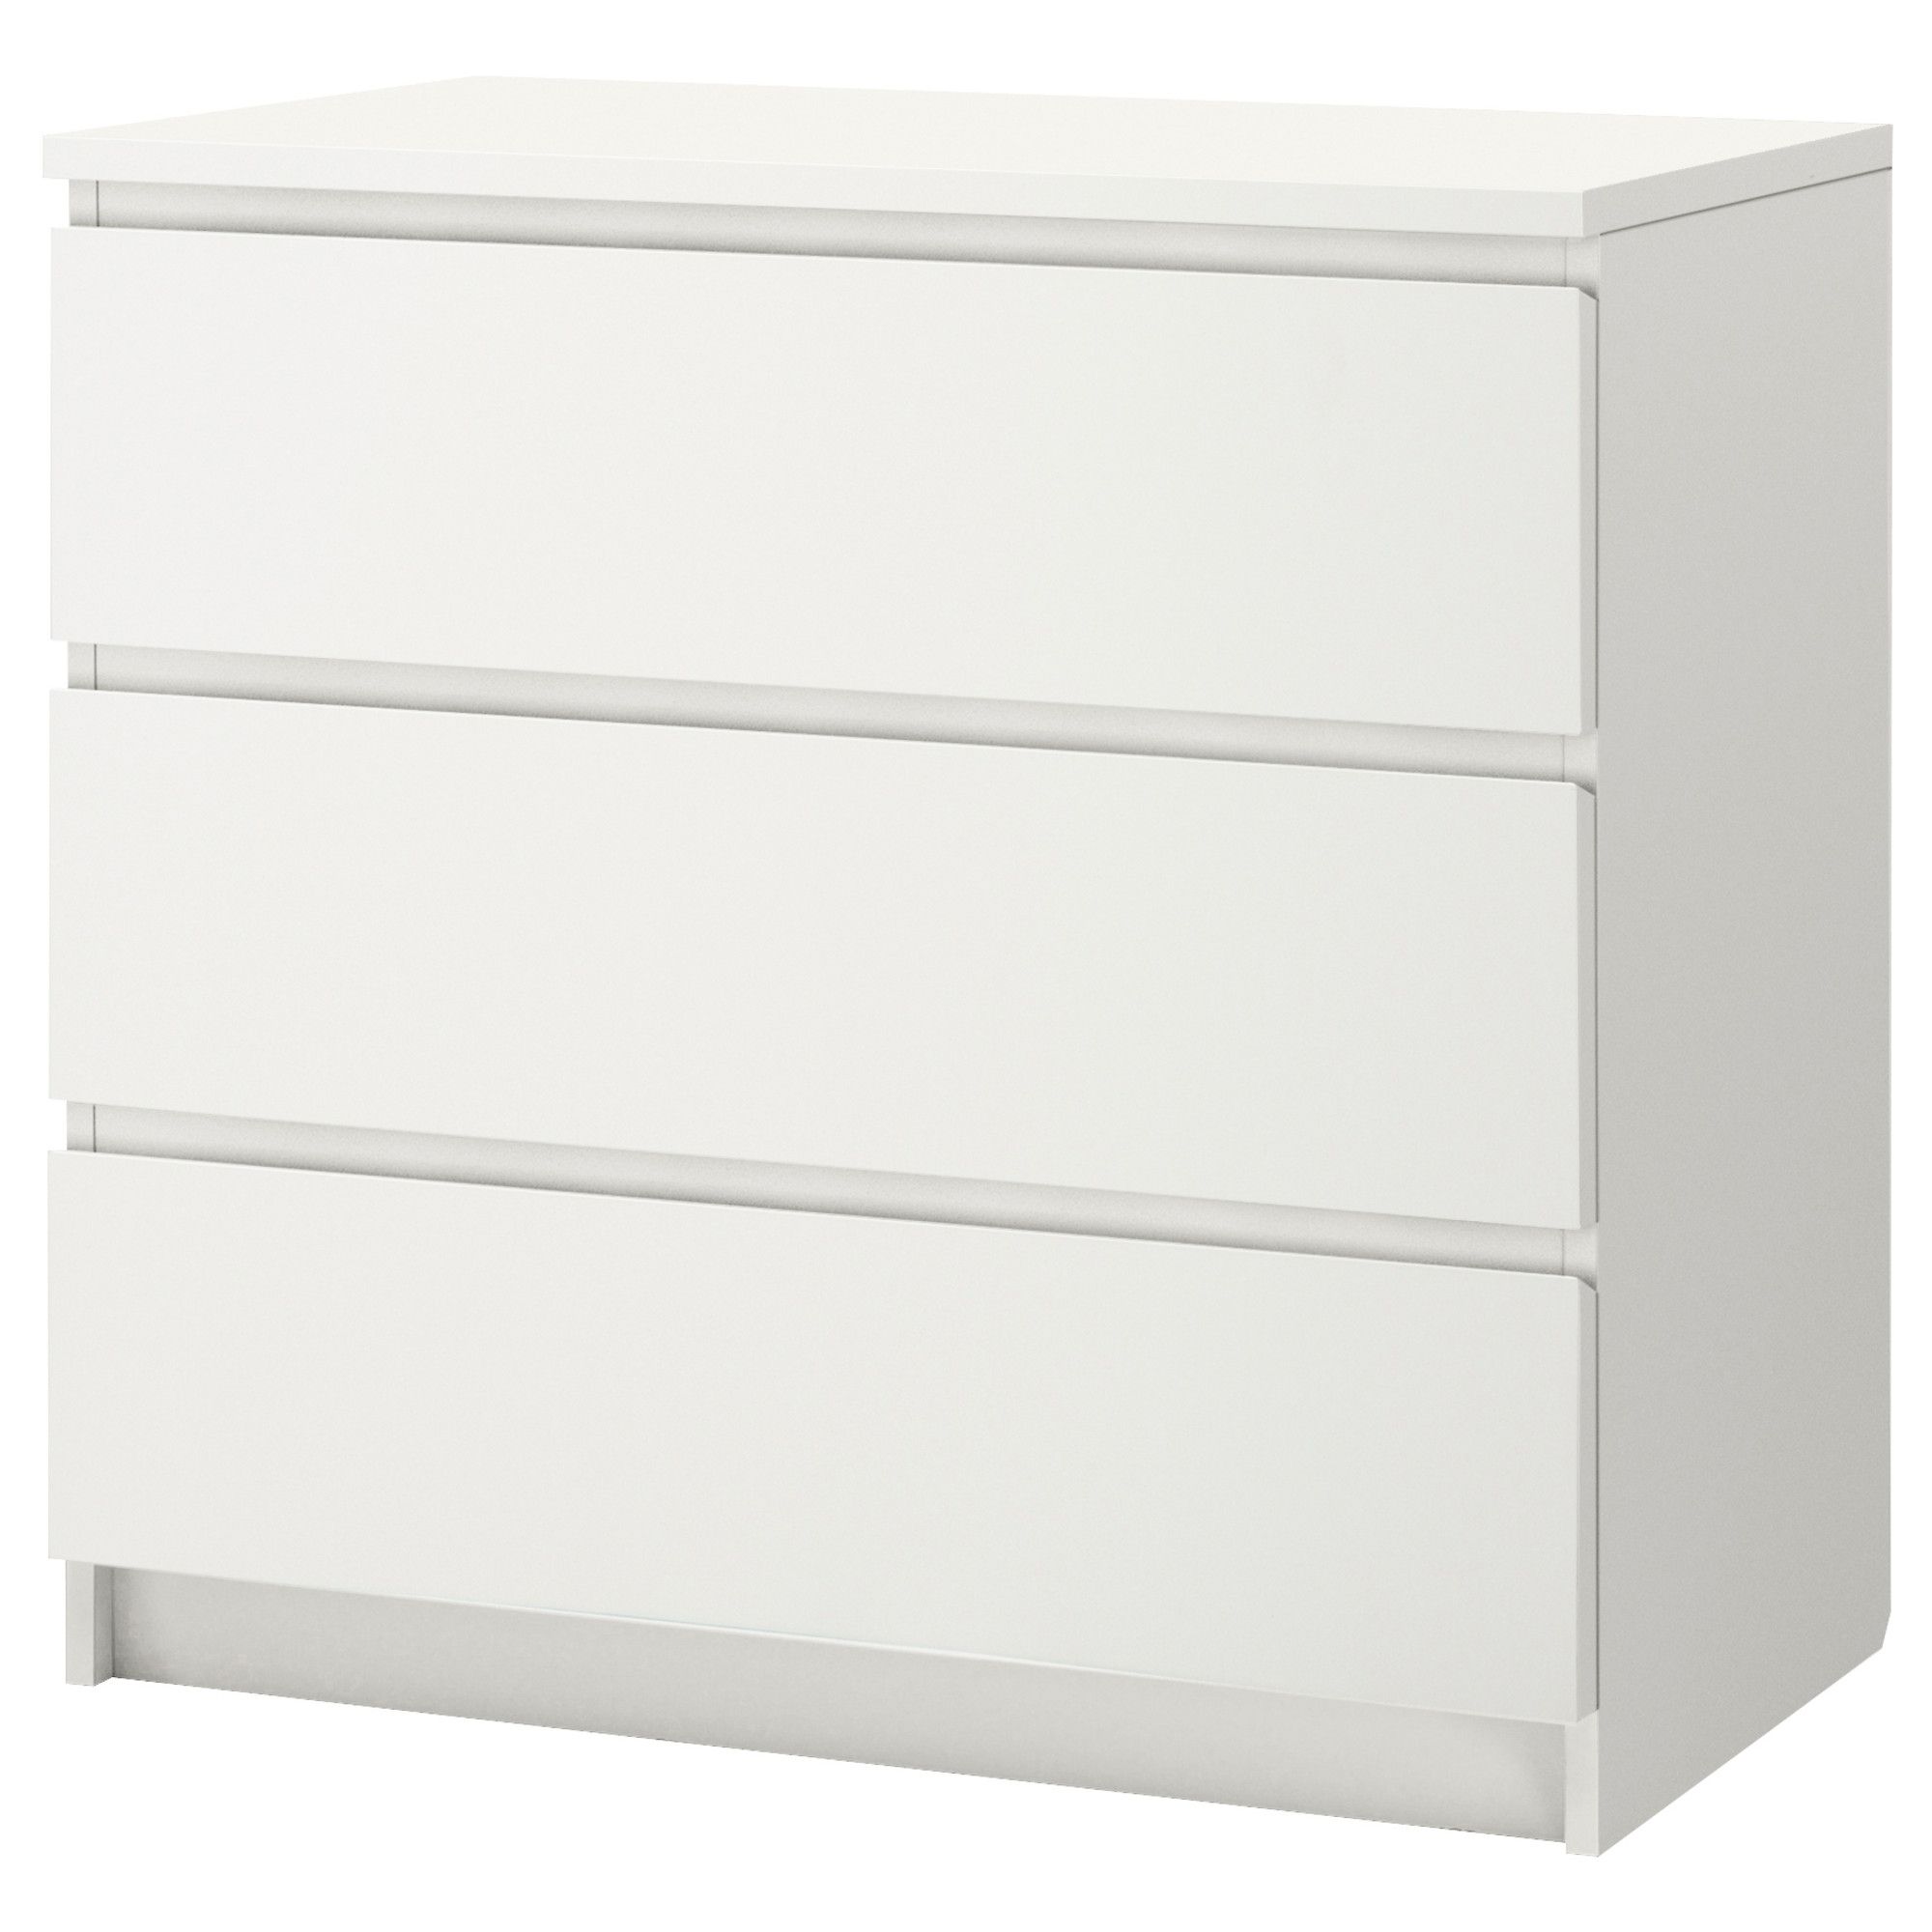 Ikea Lithuania – Shop For Furniture, Lighting, Home Accessories & More For Current Koip 6 Door Sideboards (View 3 of 20)